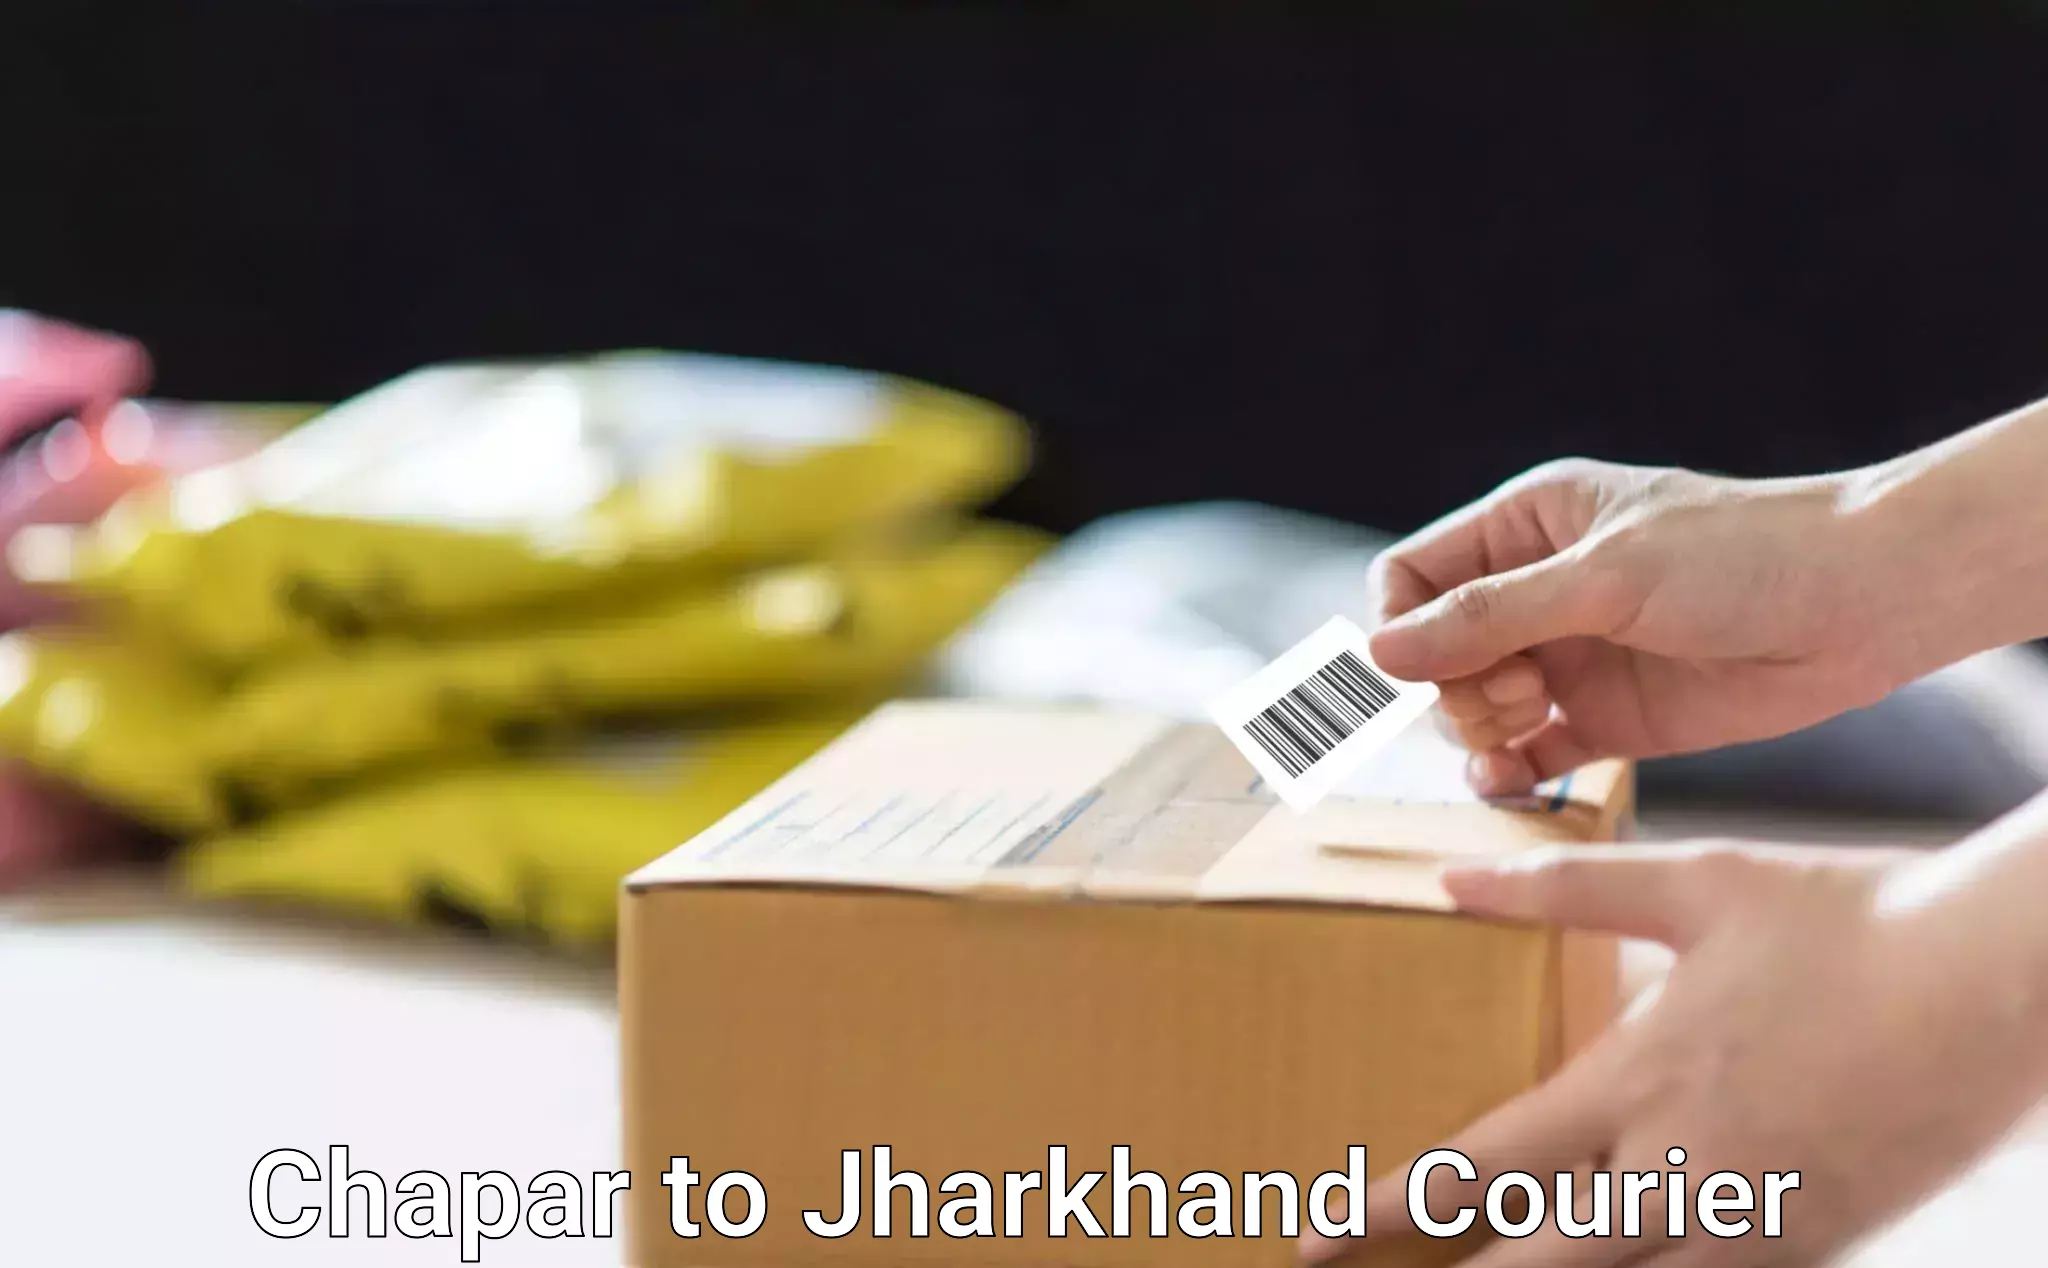 State-of-the-art courier technology Chapar to Rangalia